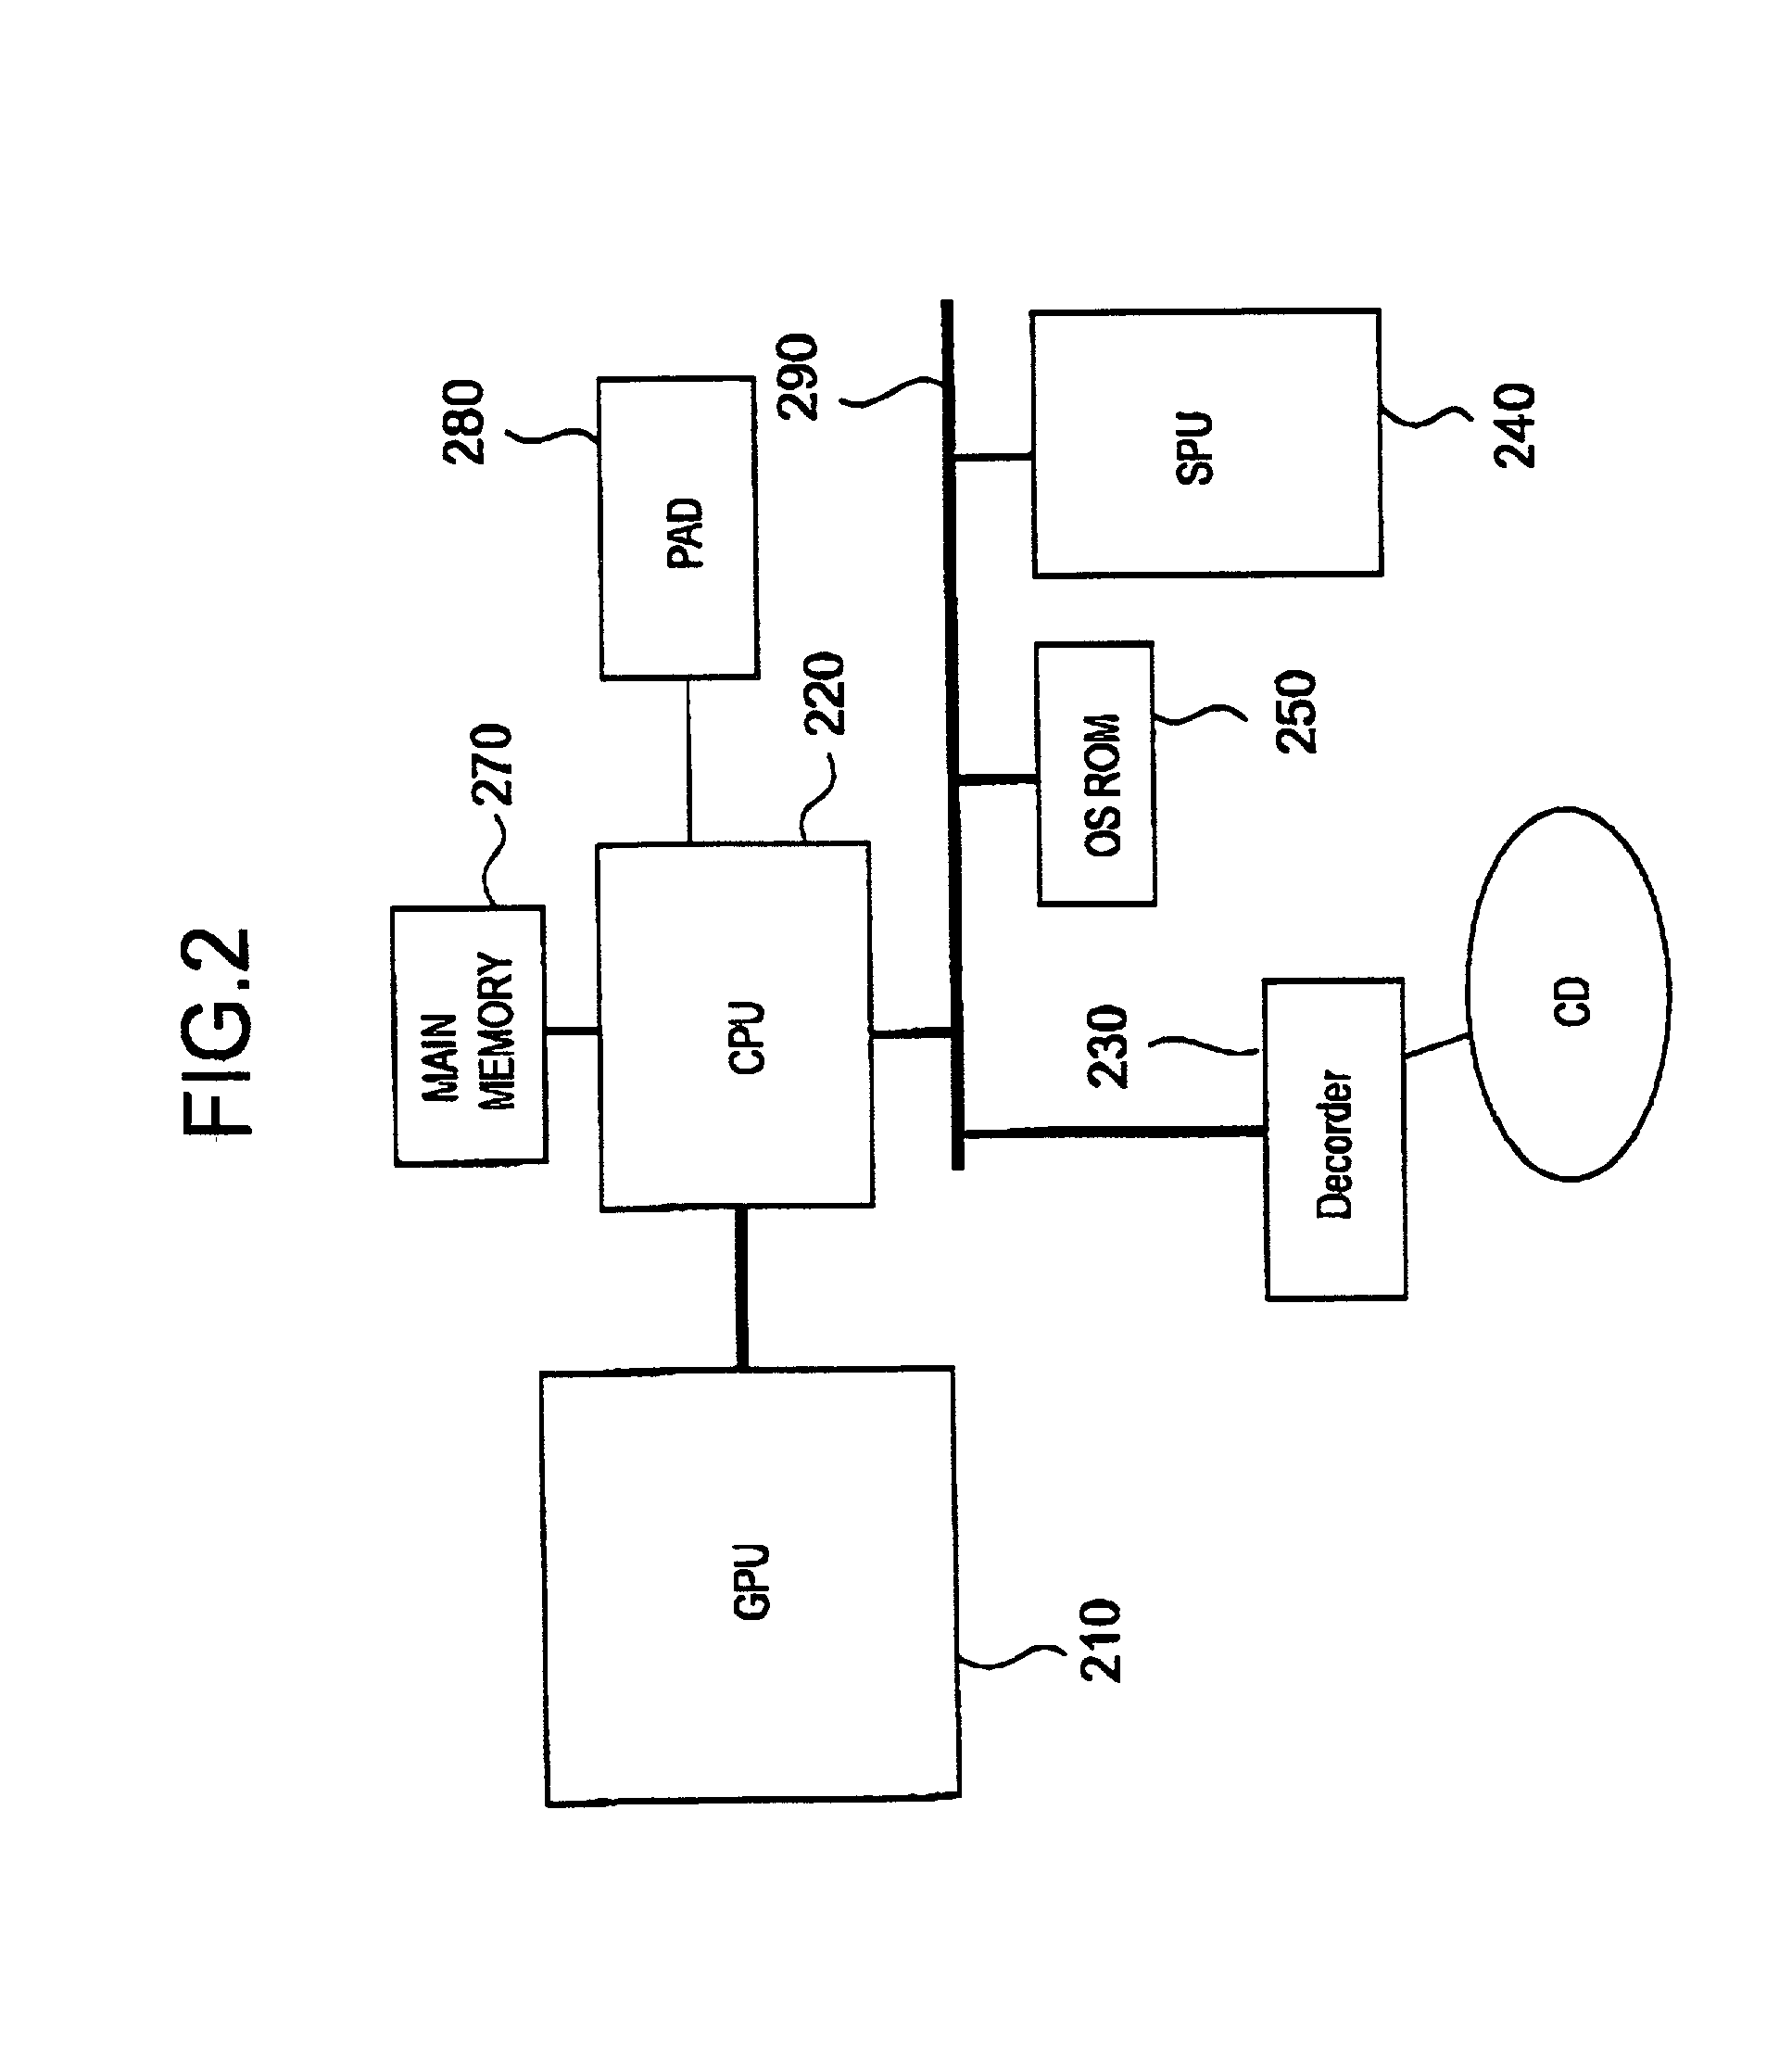 Entertainment apparatus having compatibility and computer system